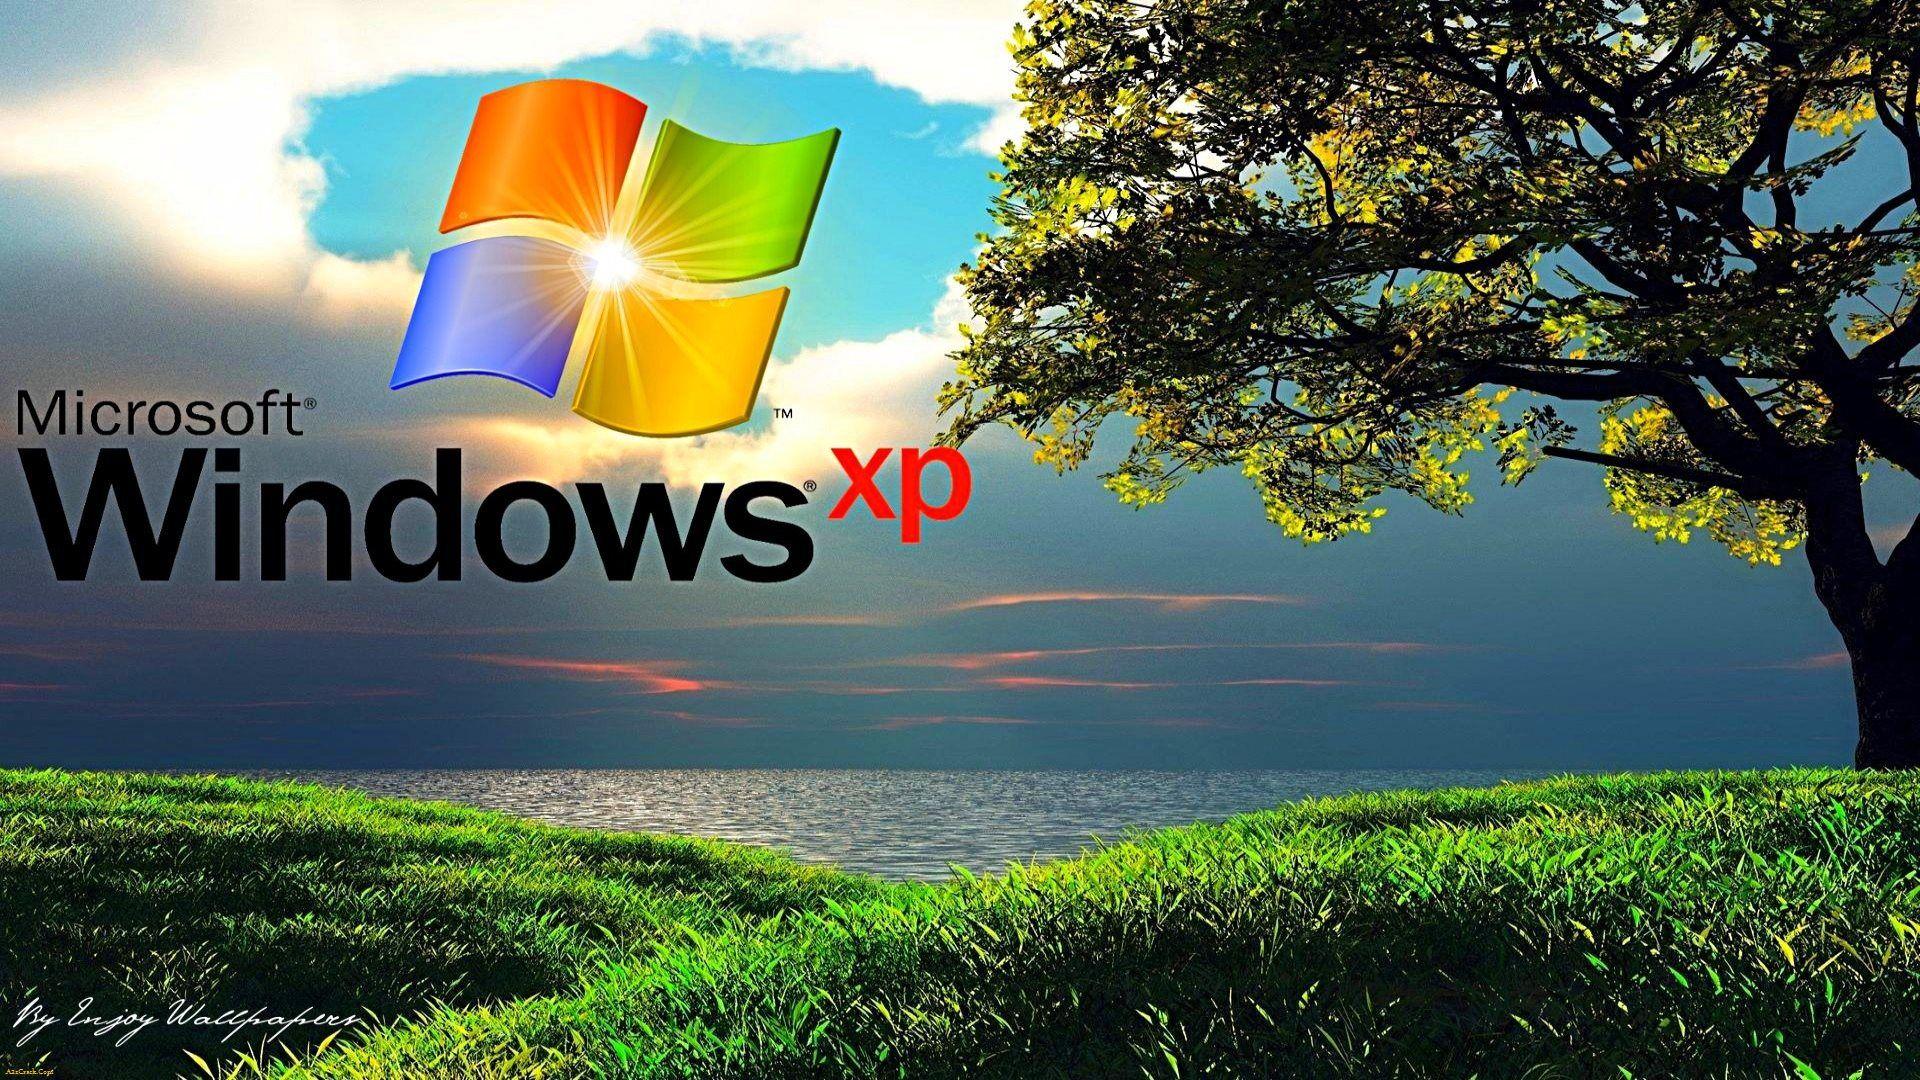 Cool Windows XP Wallpaper In HD For Free Download 1920x1080